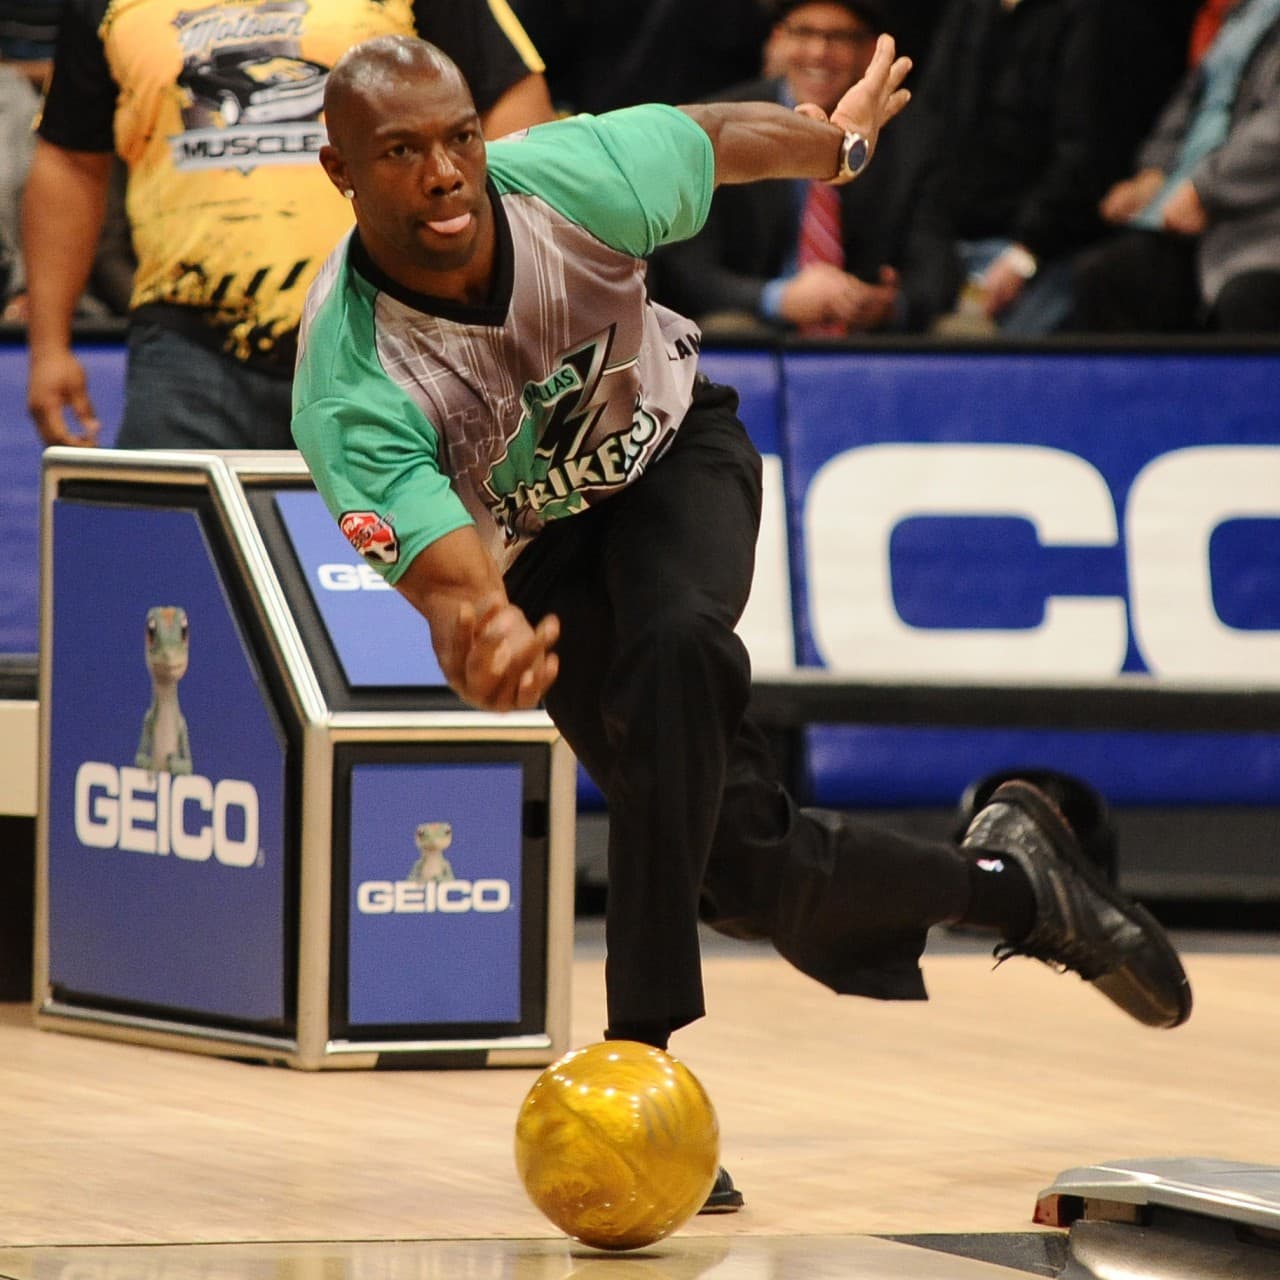 Terrell Owens Strikes Again In Bowling! Only A Game